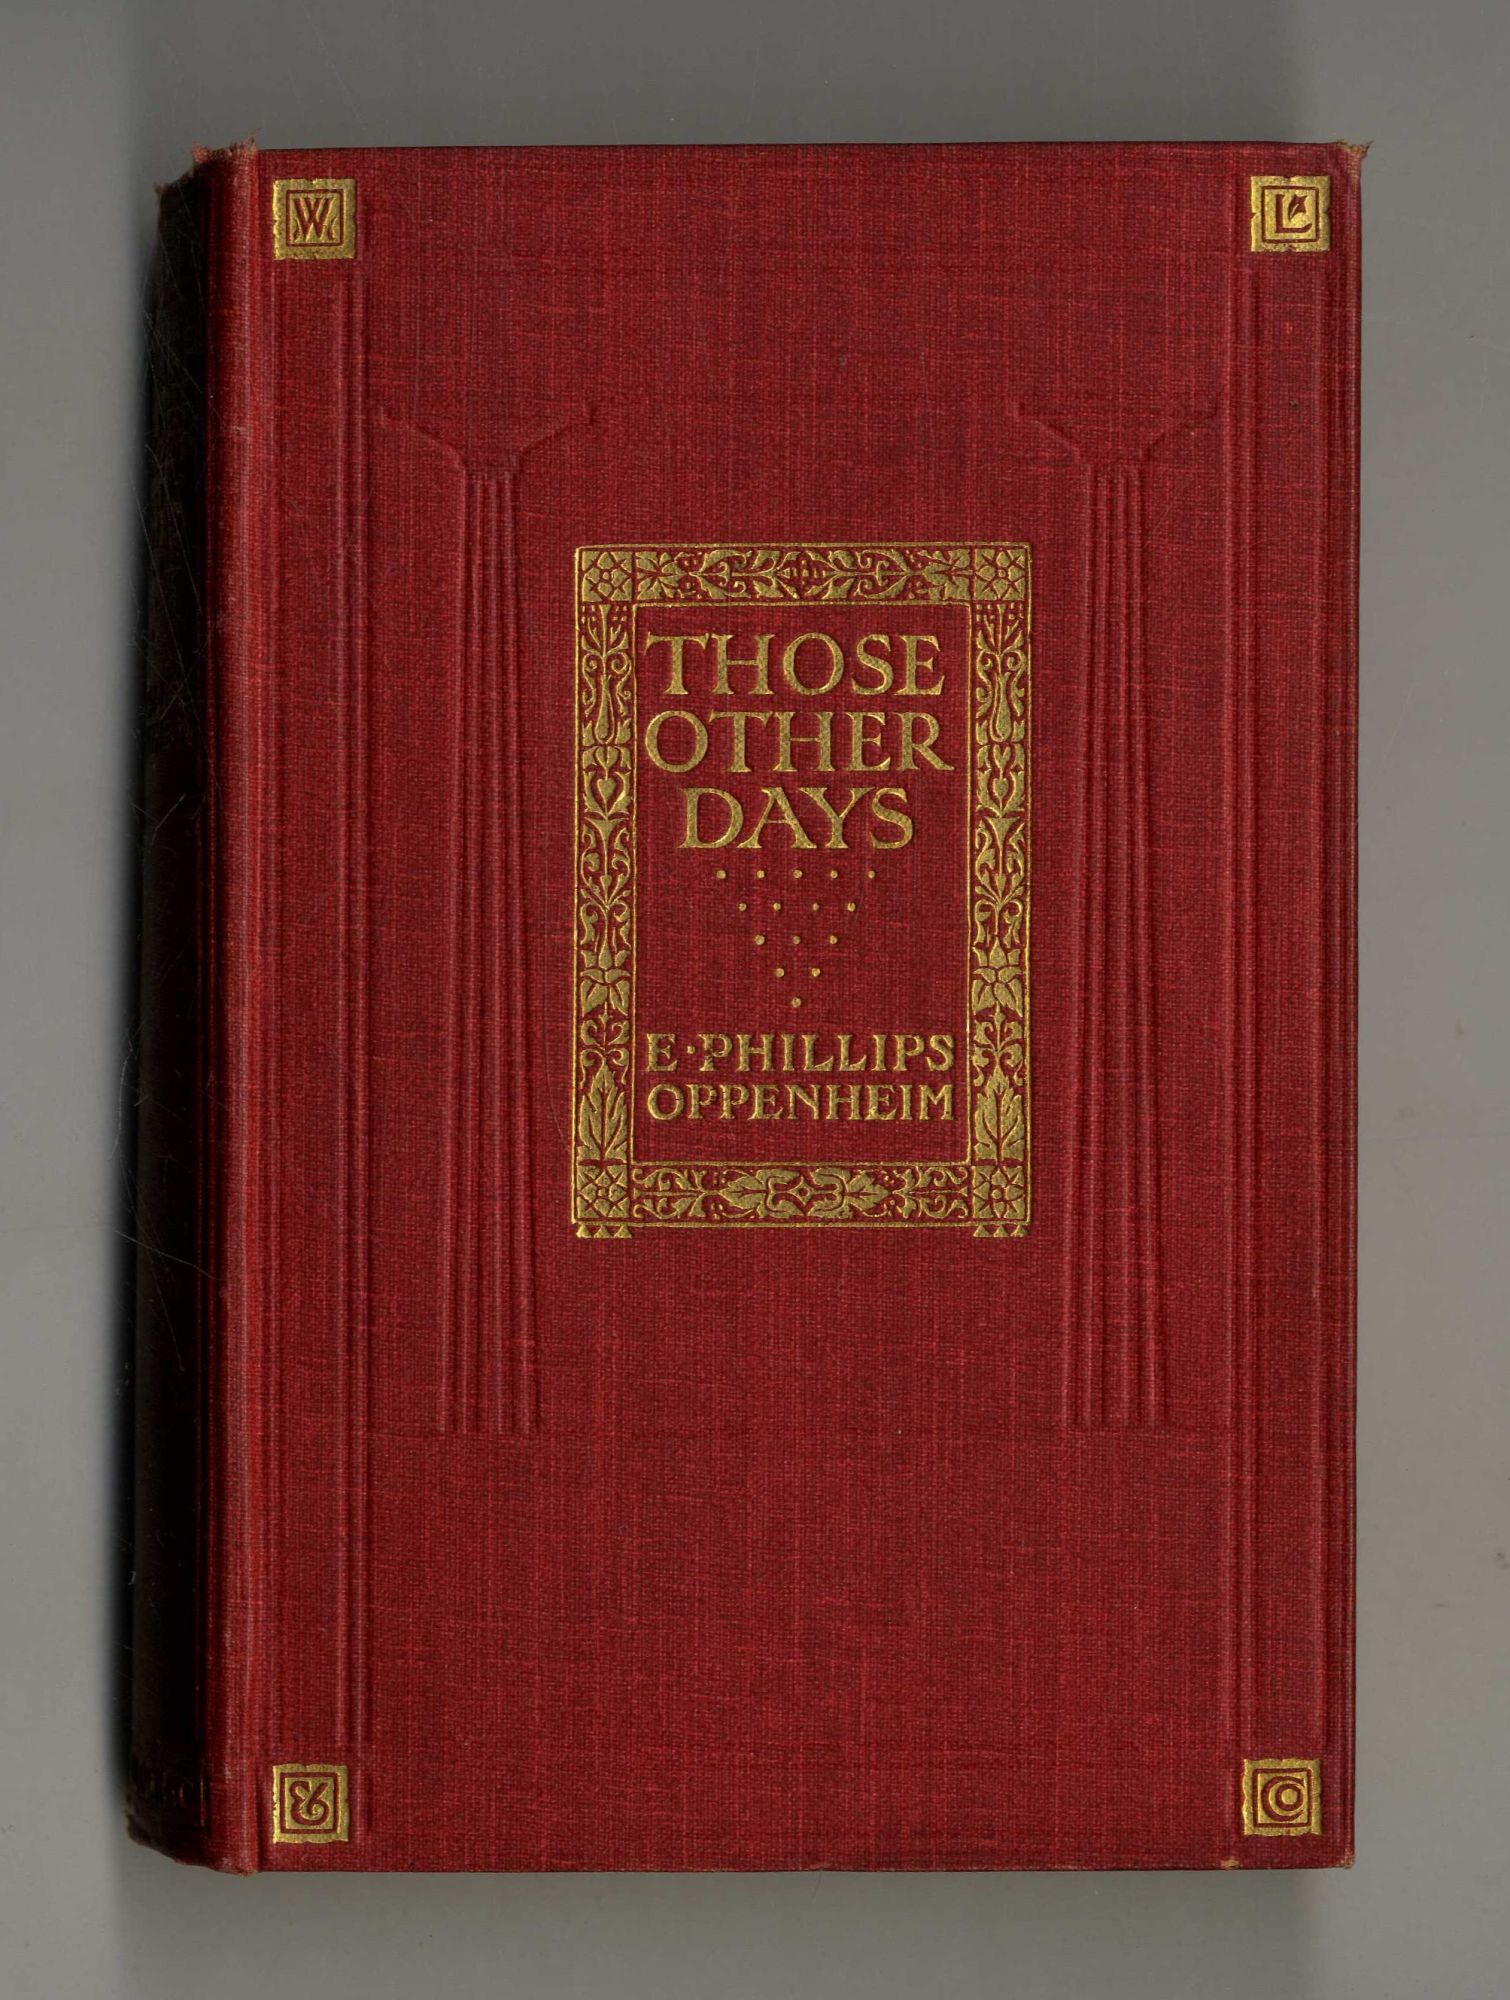 Book #160202 Those Other Days. E. Phillips Oppenheim.